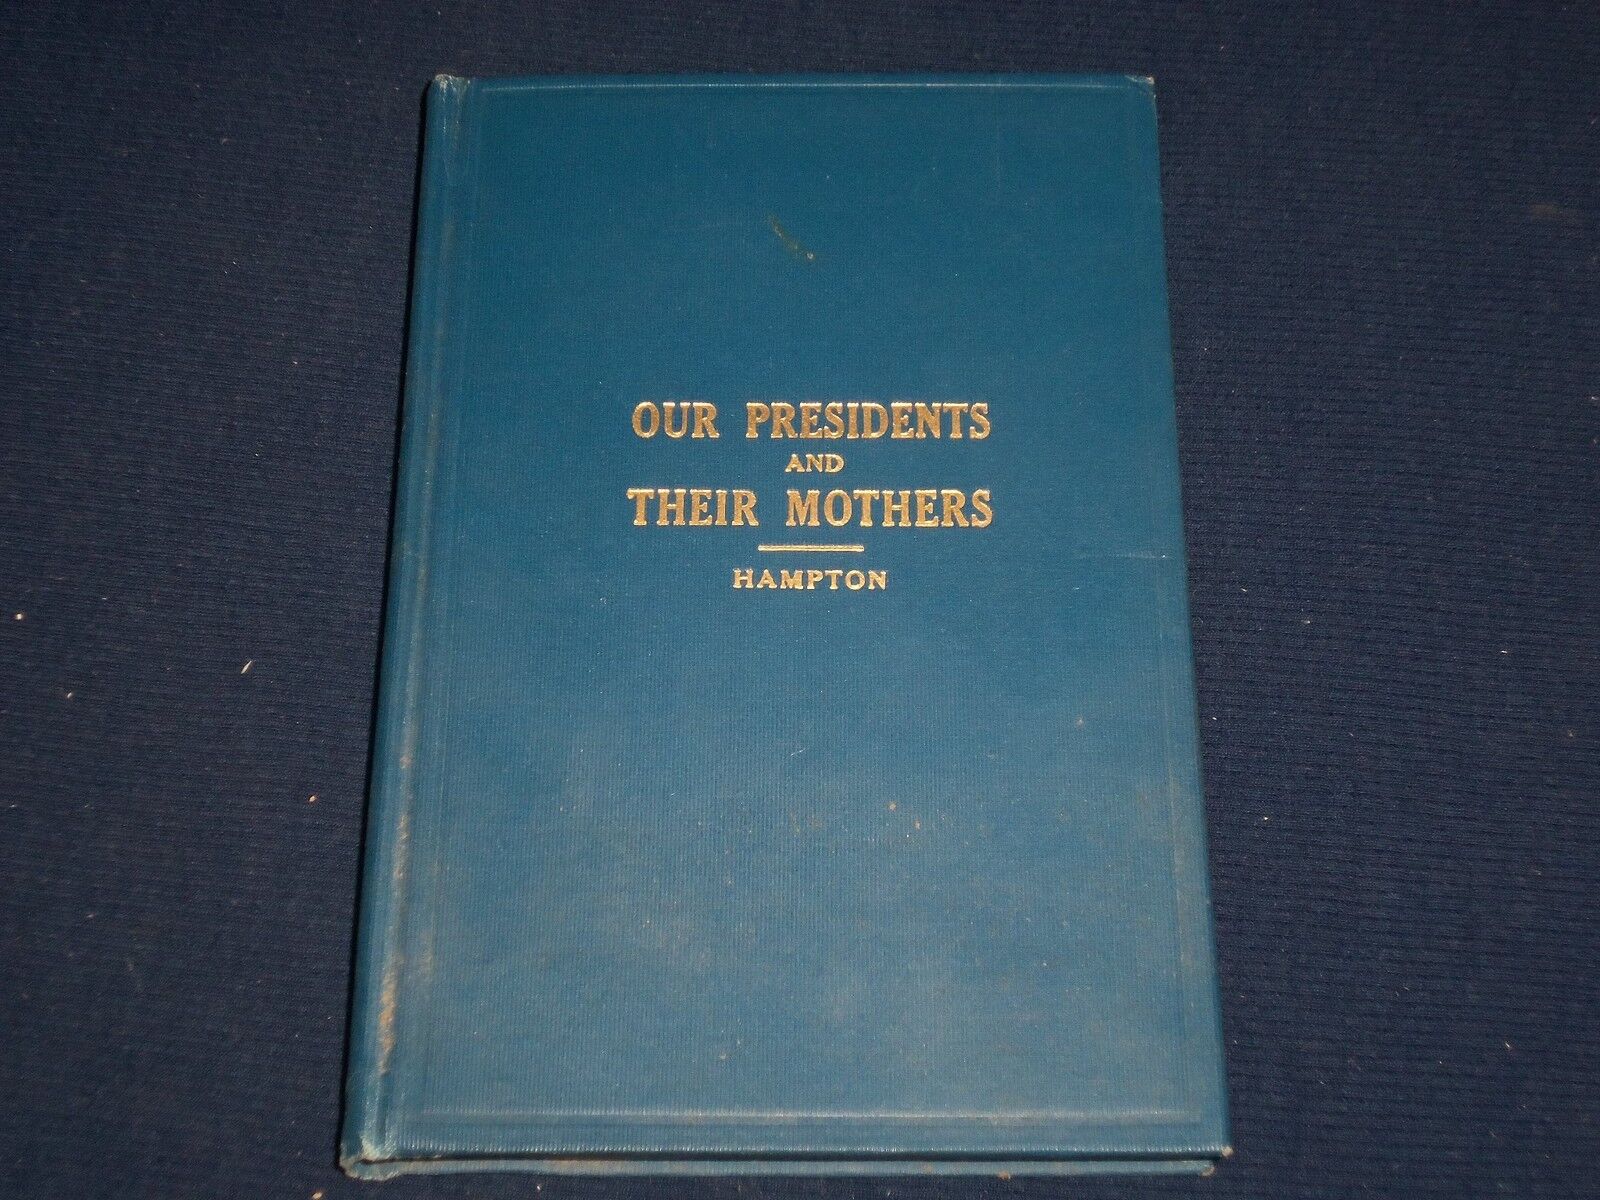 1918 OUR PRESIDENTS & THEIR MOTHERS HARDCOVER BOOK BY WILLIAM HAMPTON - KD 2140